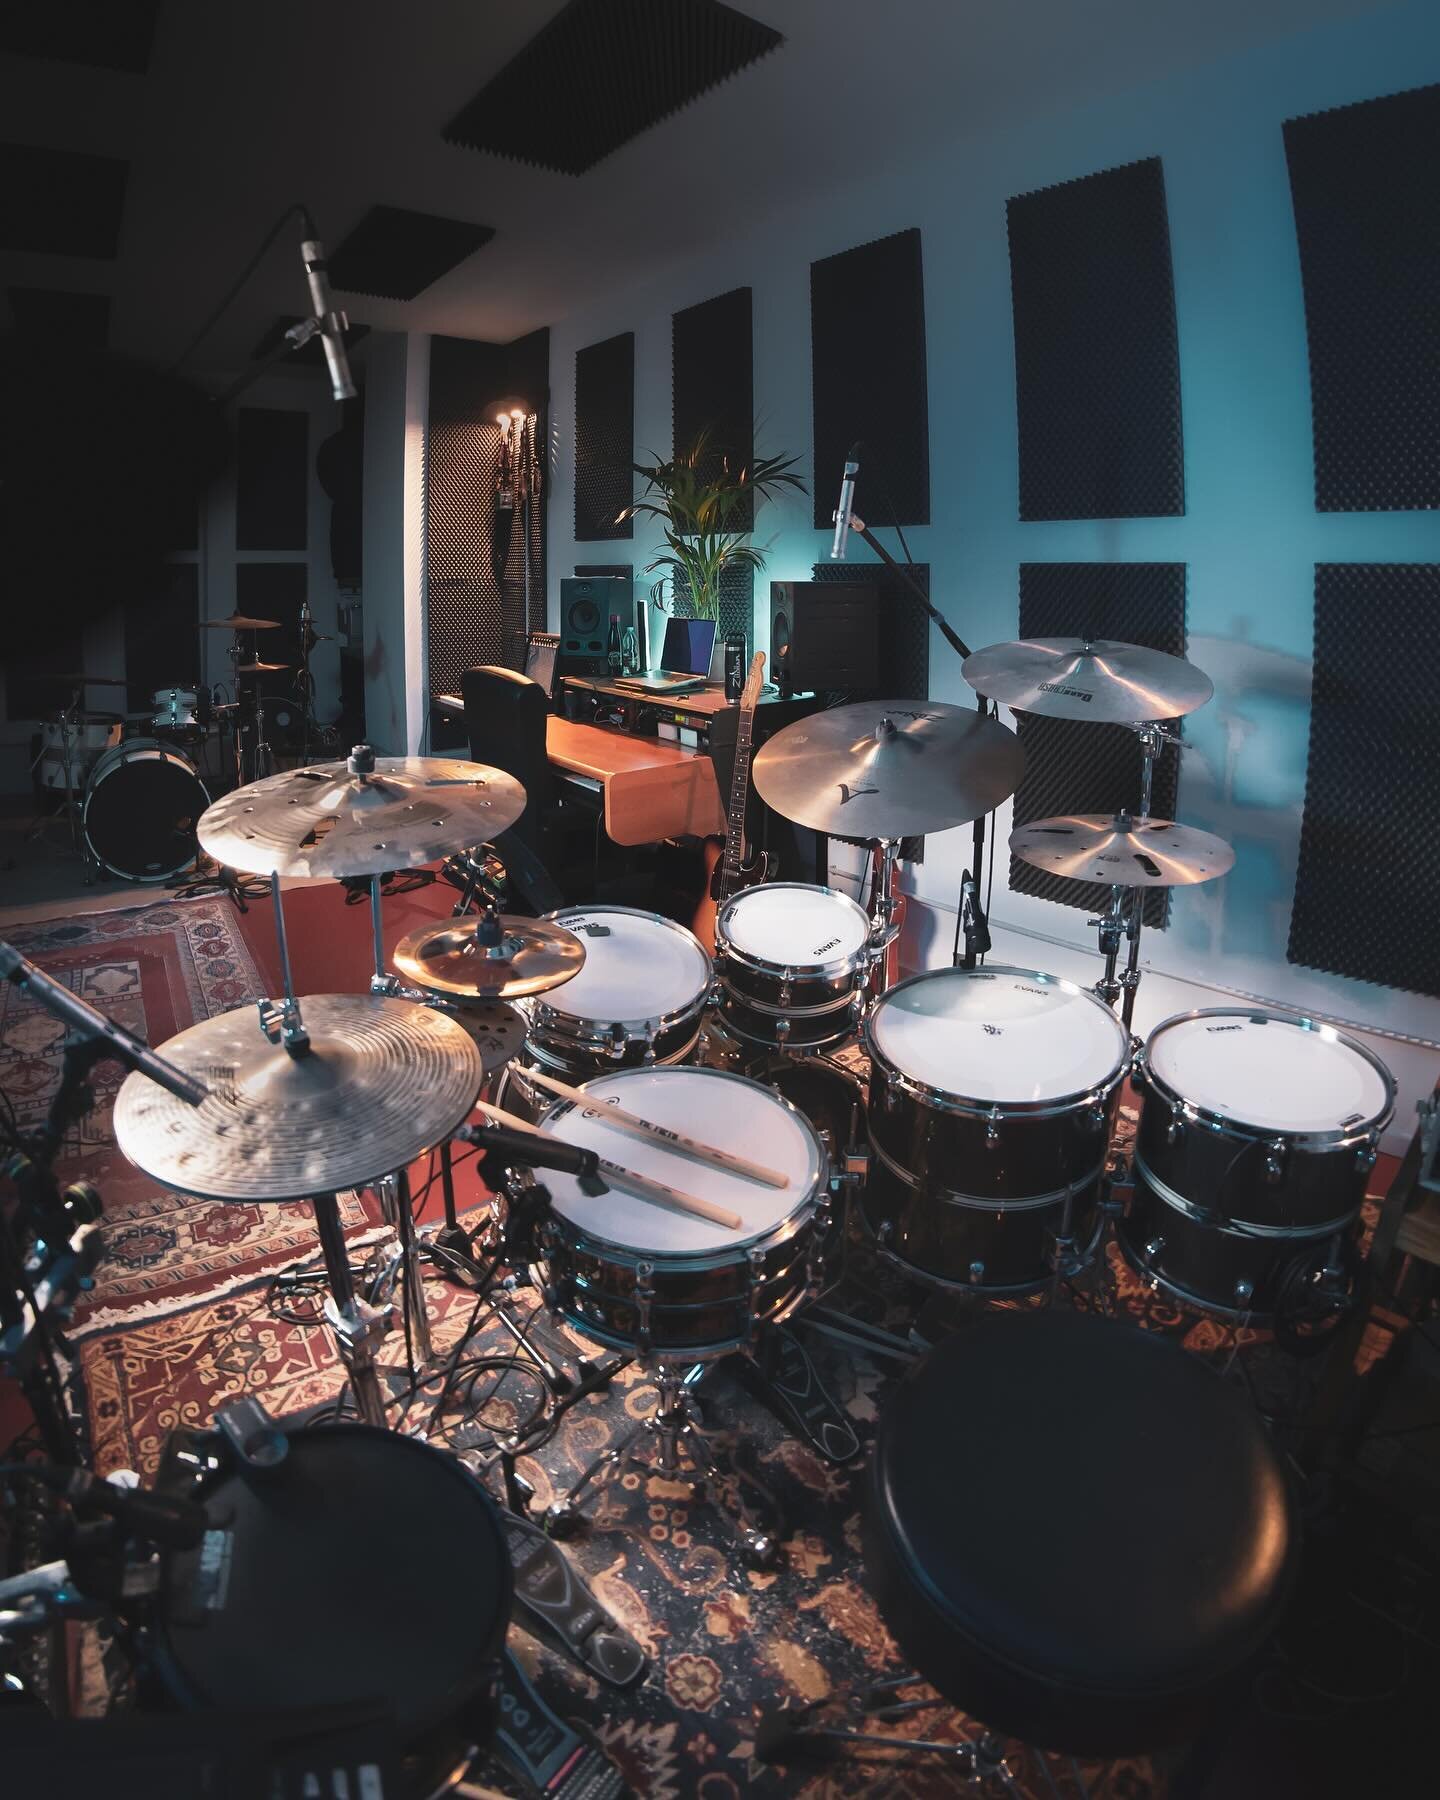 New studio - New setup ✨
I&rsquo;m finally available for recording sessions from my new studio in Milan ✌️
Ready to share loads of stuff from here.
#drums #recordingstudio #milano